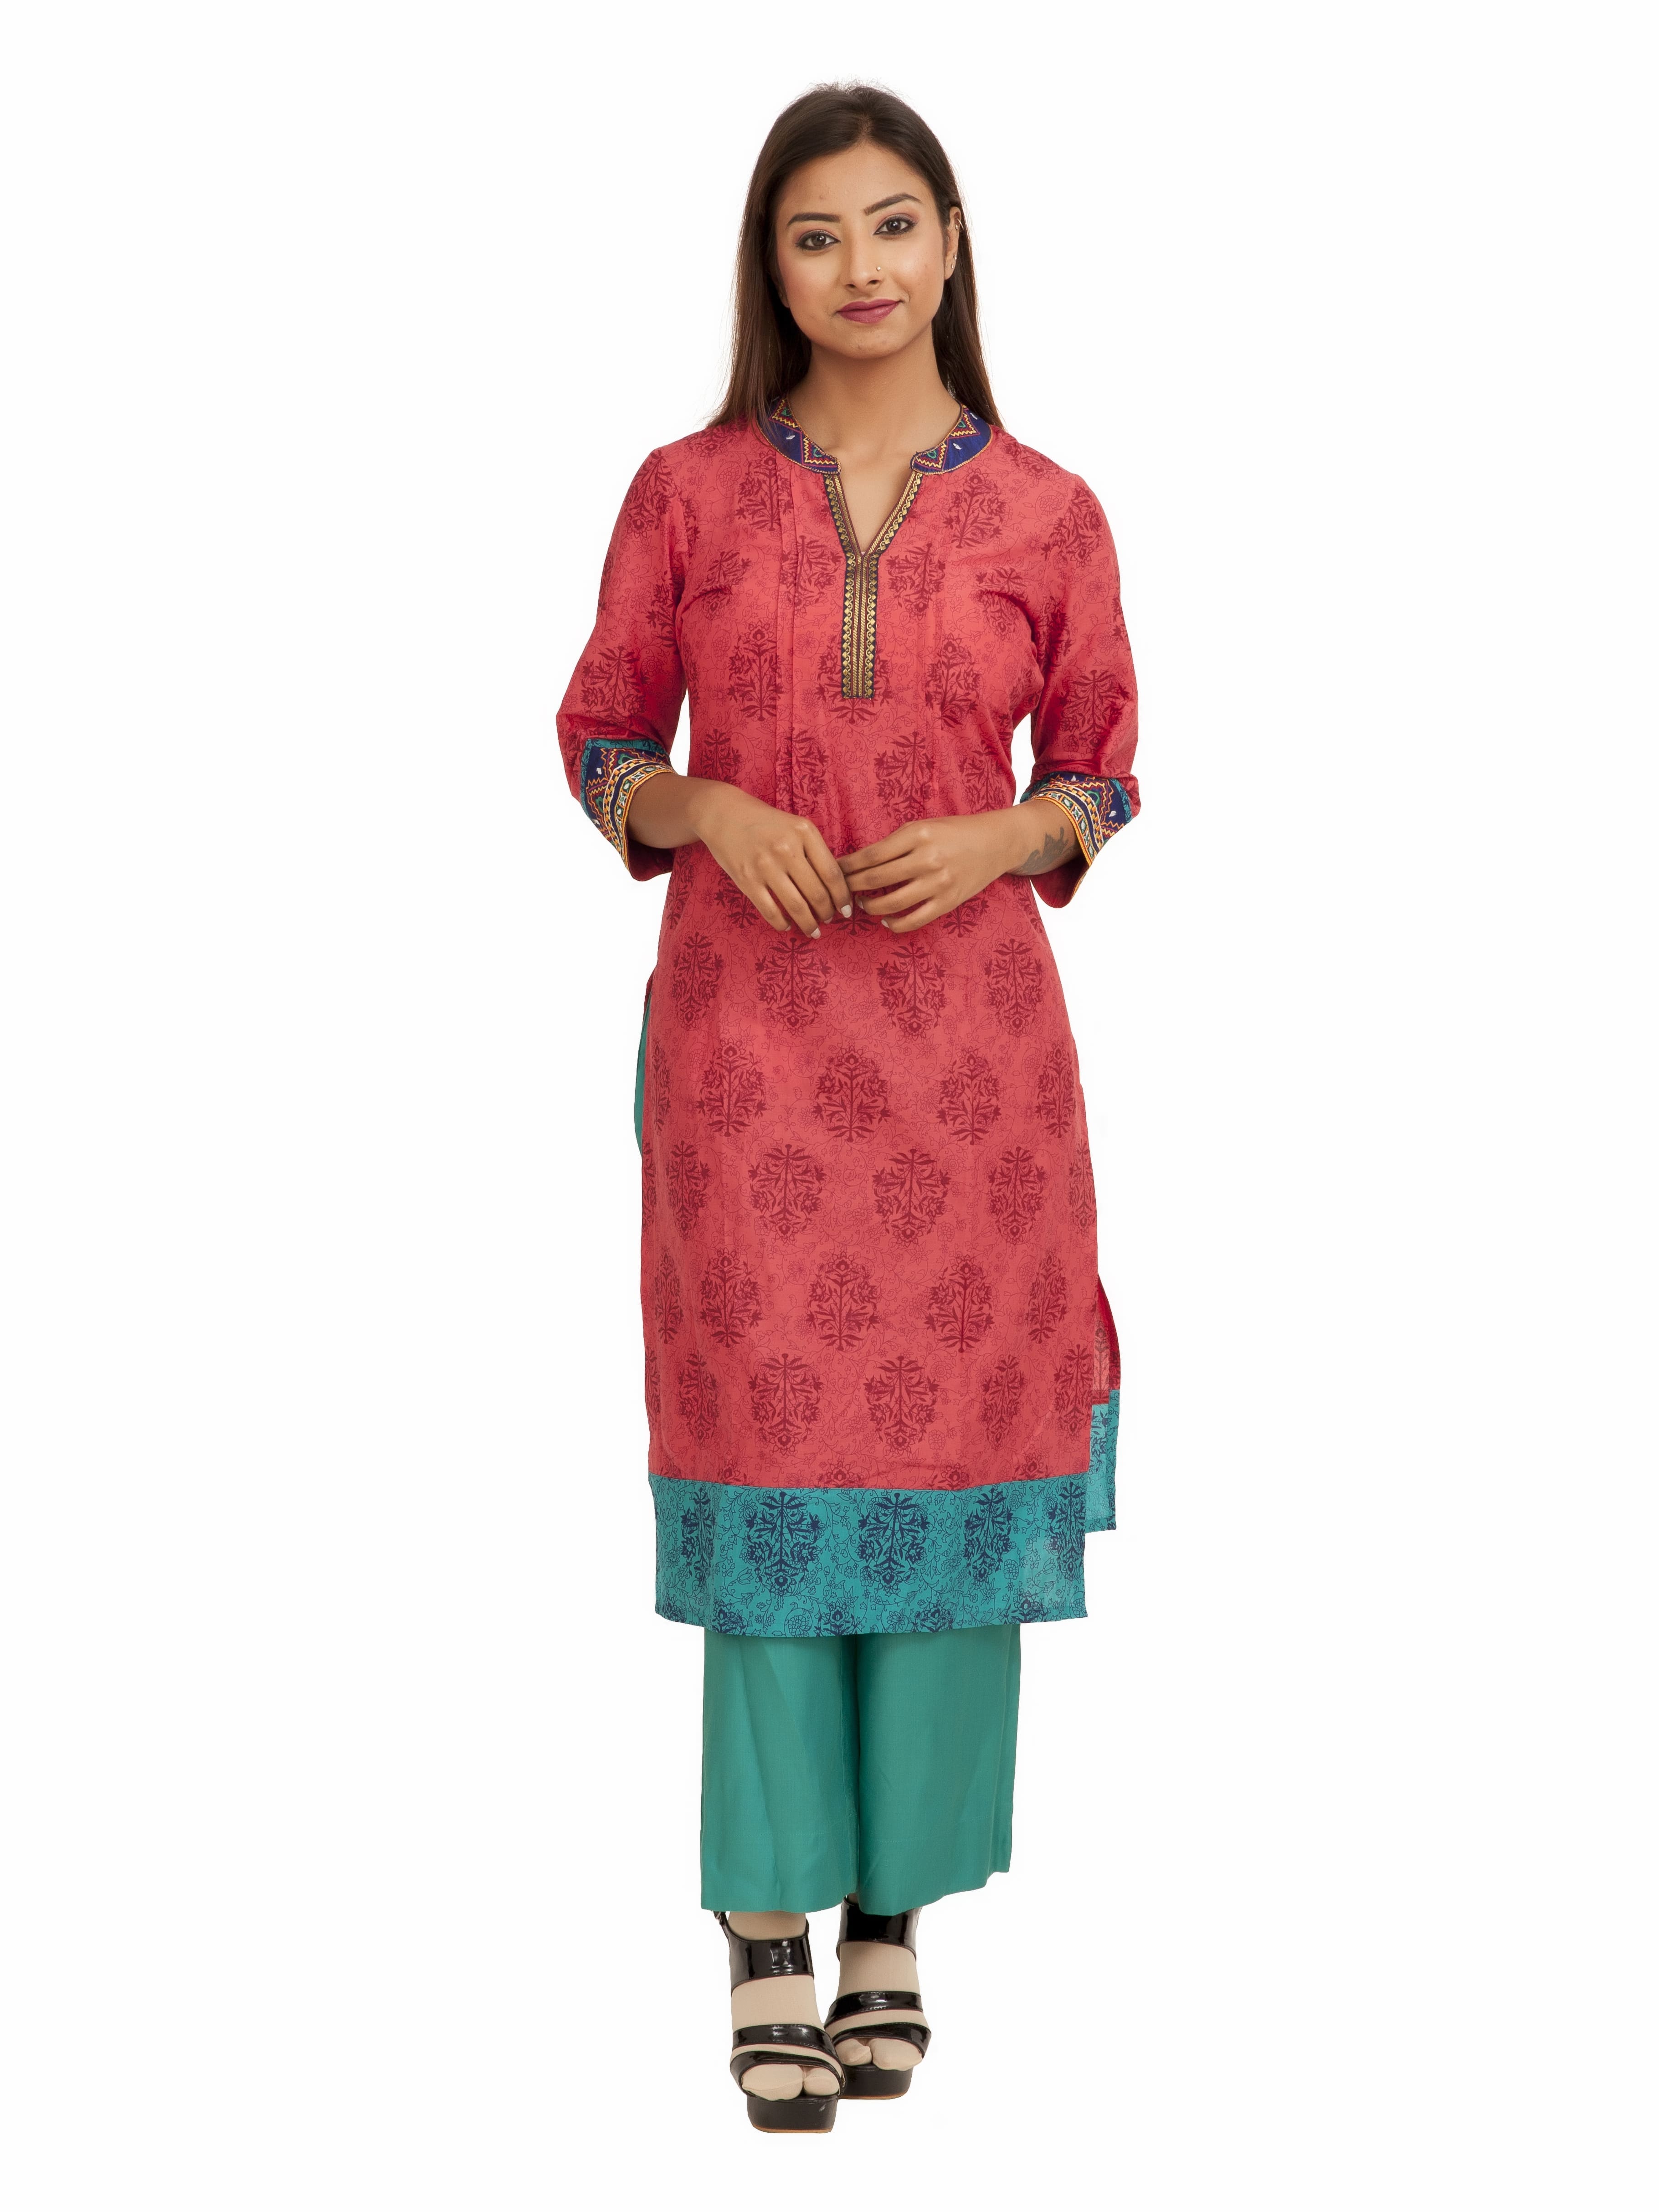 Wholesale Ladies Clothing Suppliers in India